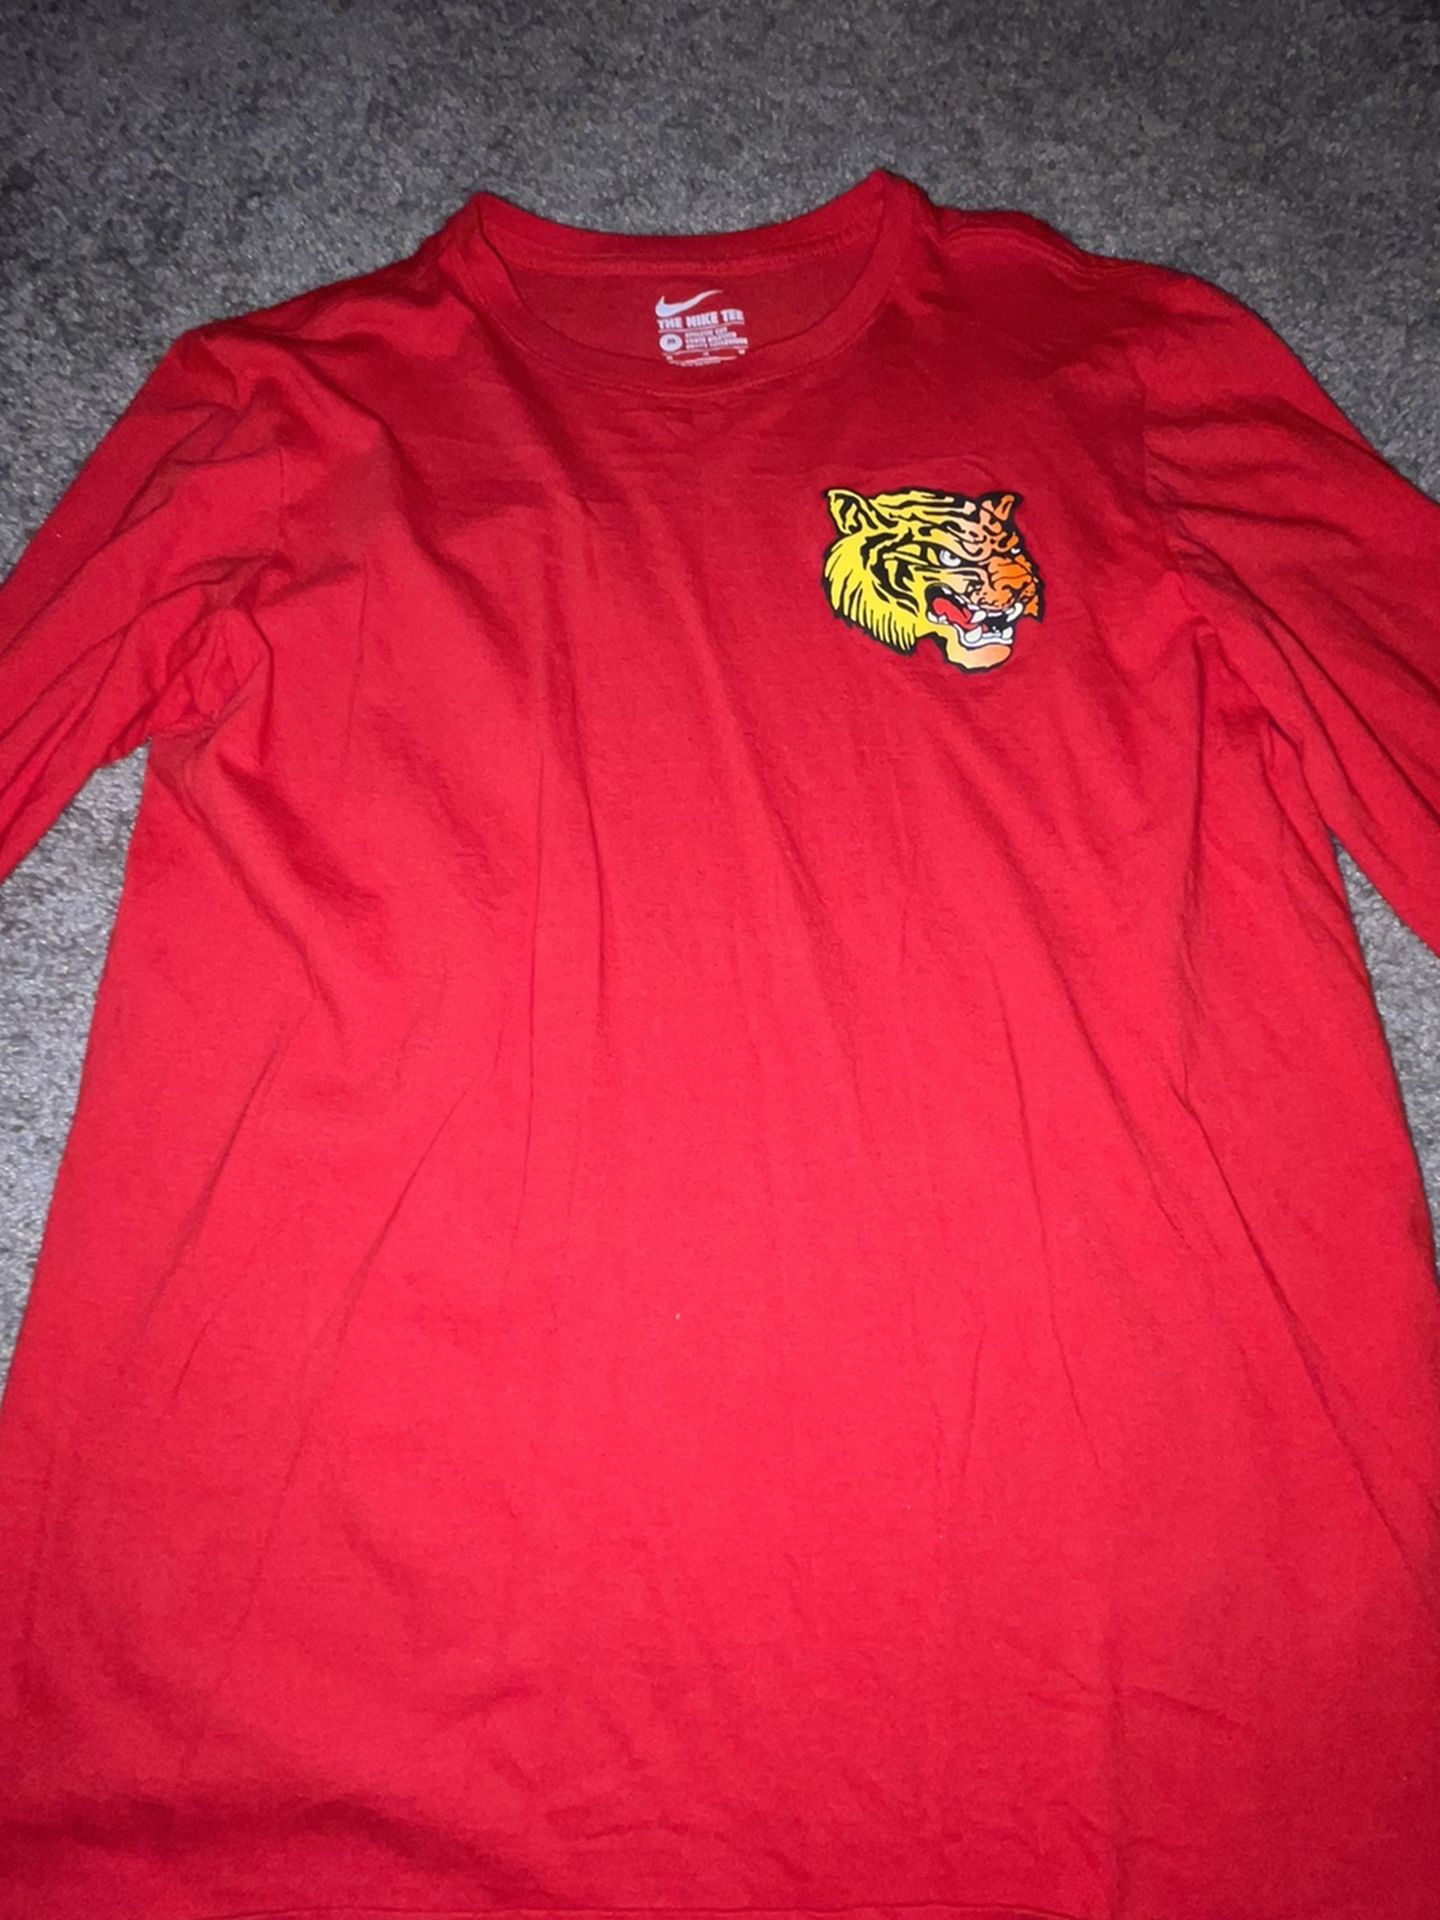 Nike - Red And Yellow Long Sleeved Shirt 